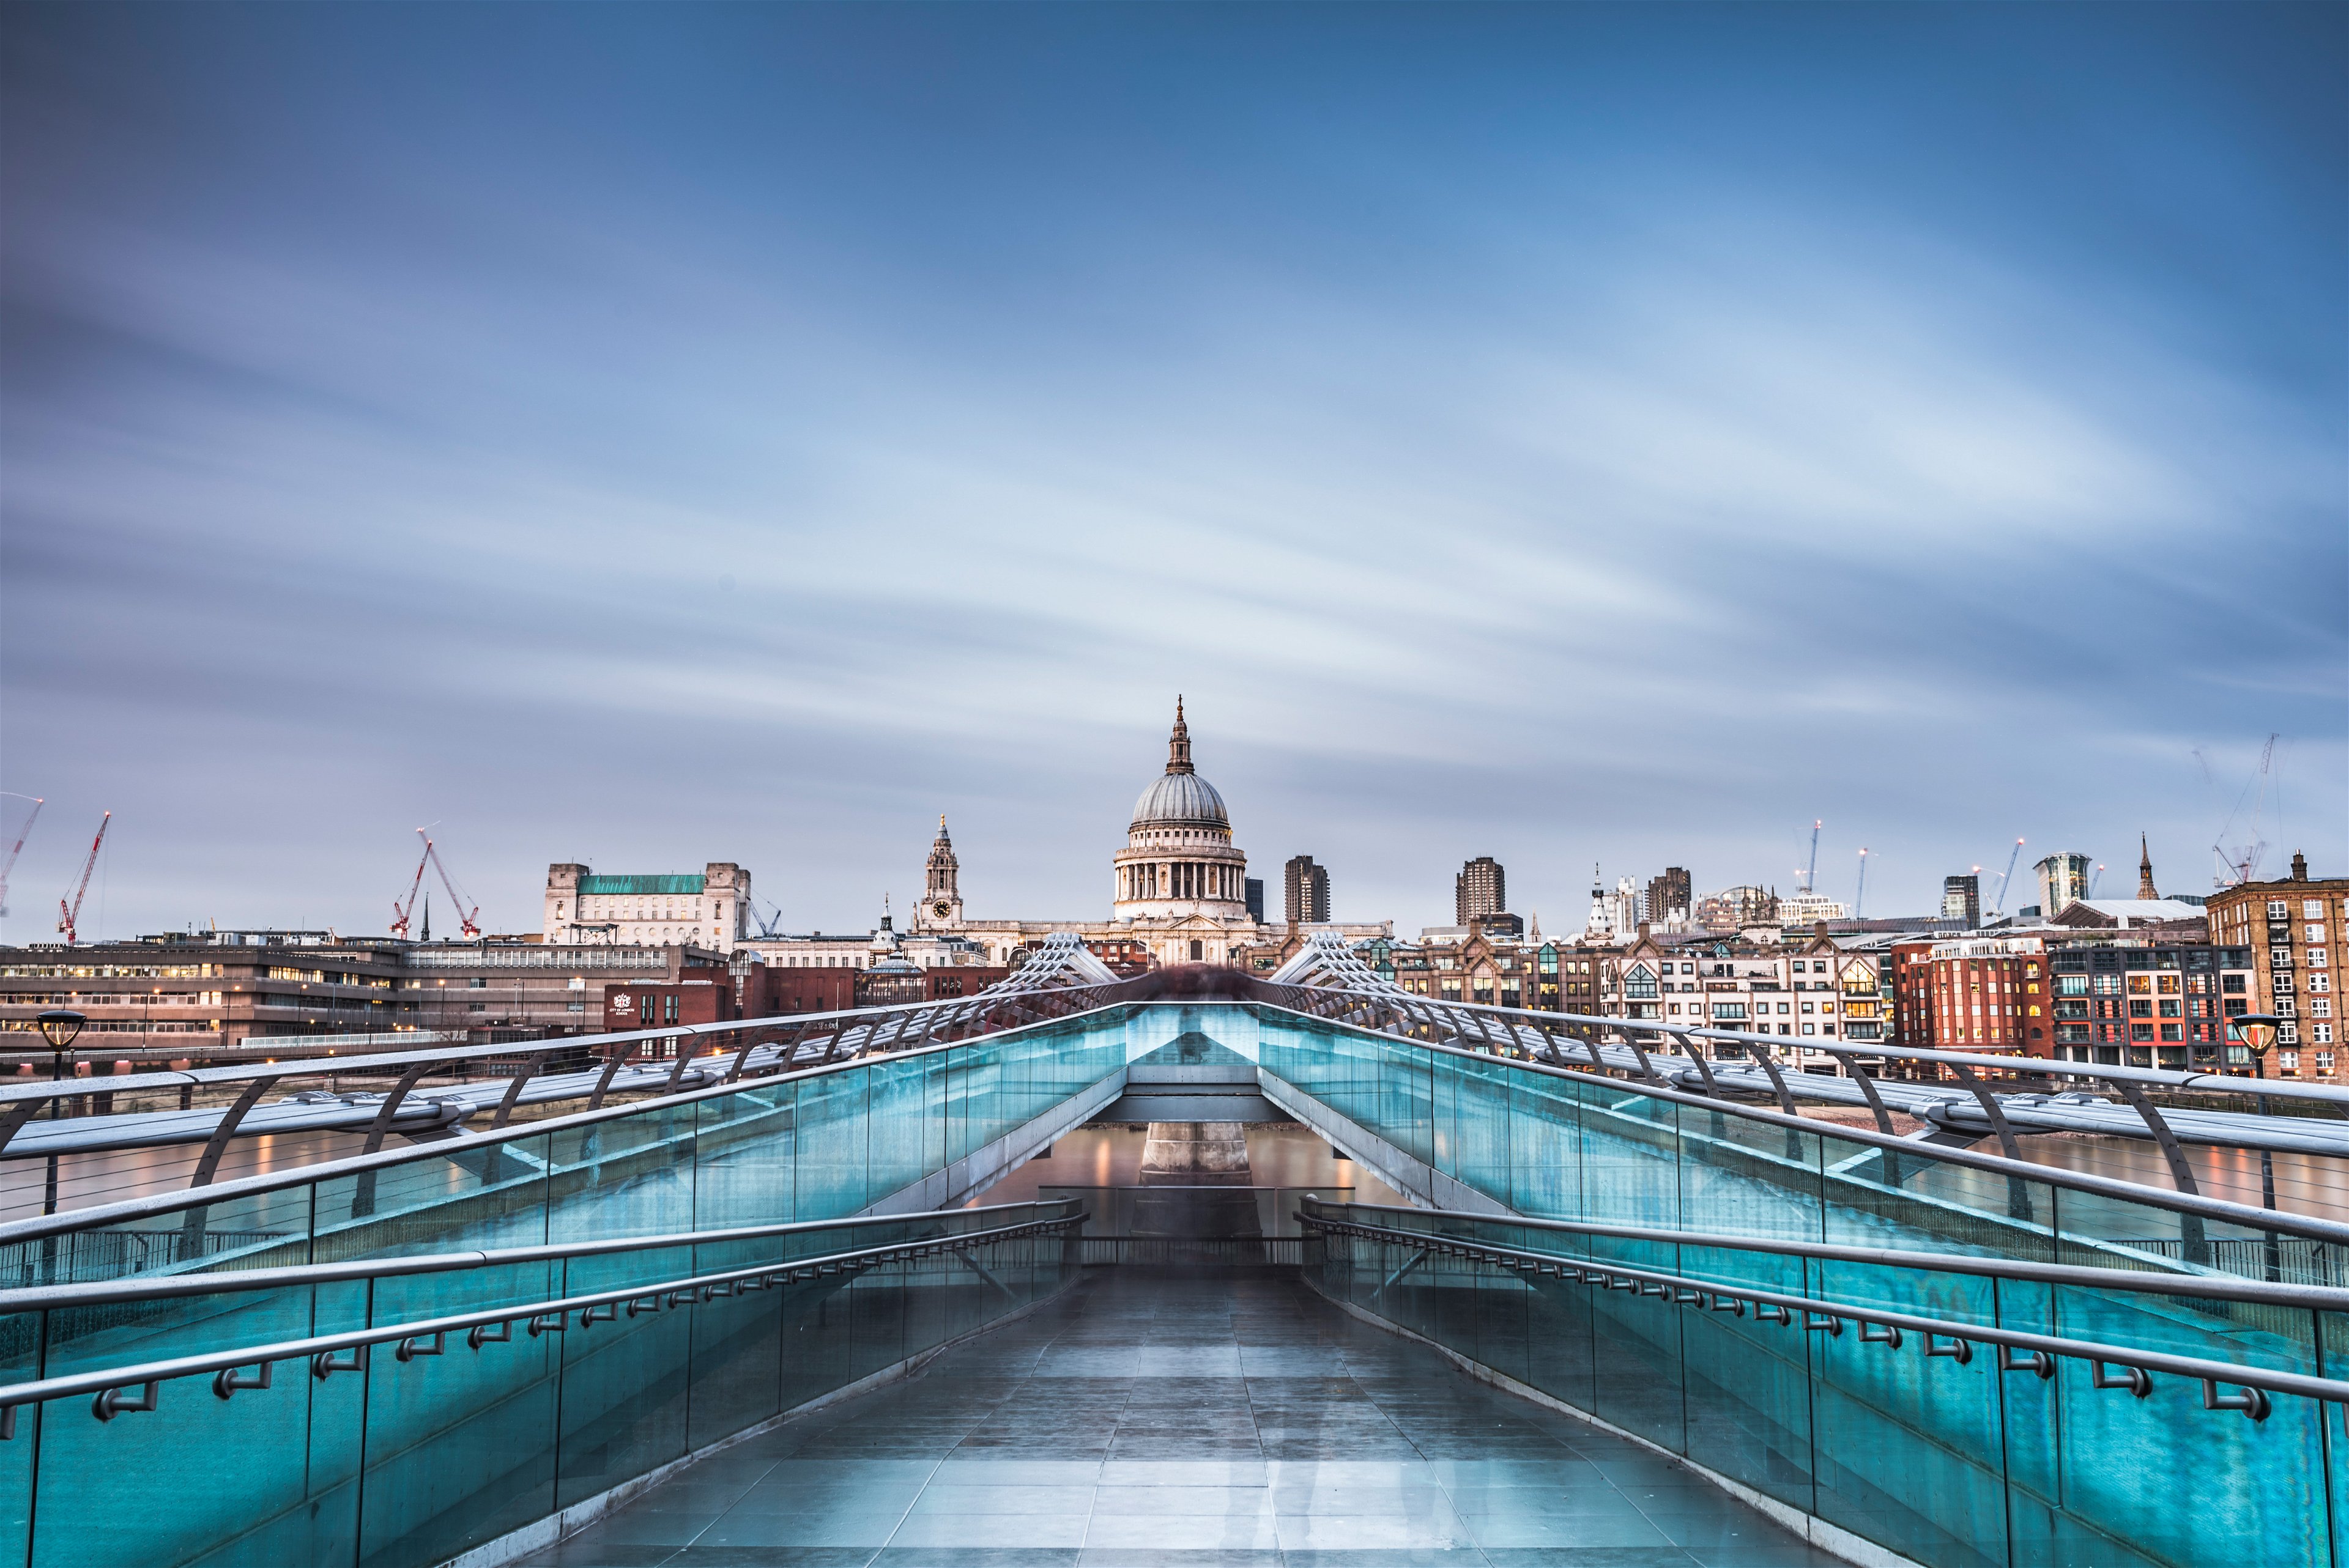 ULTIMATE INTRODUCTION TO PHOTOGRAPHY: SOUTH BANK, LONDON